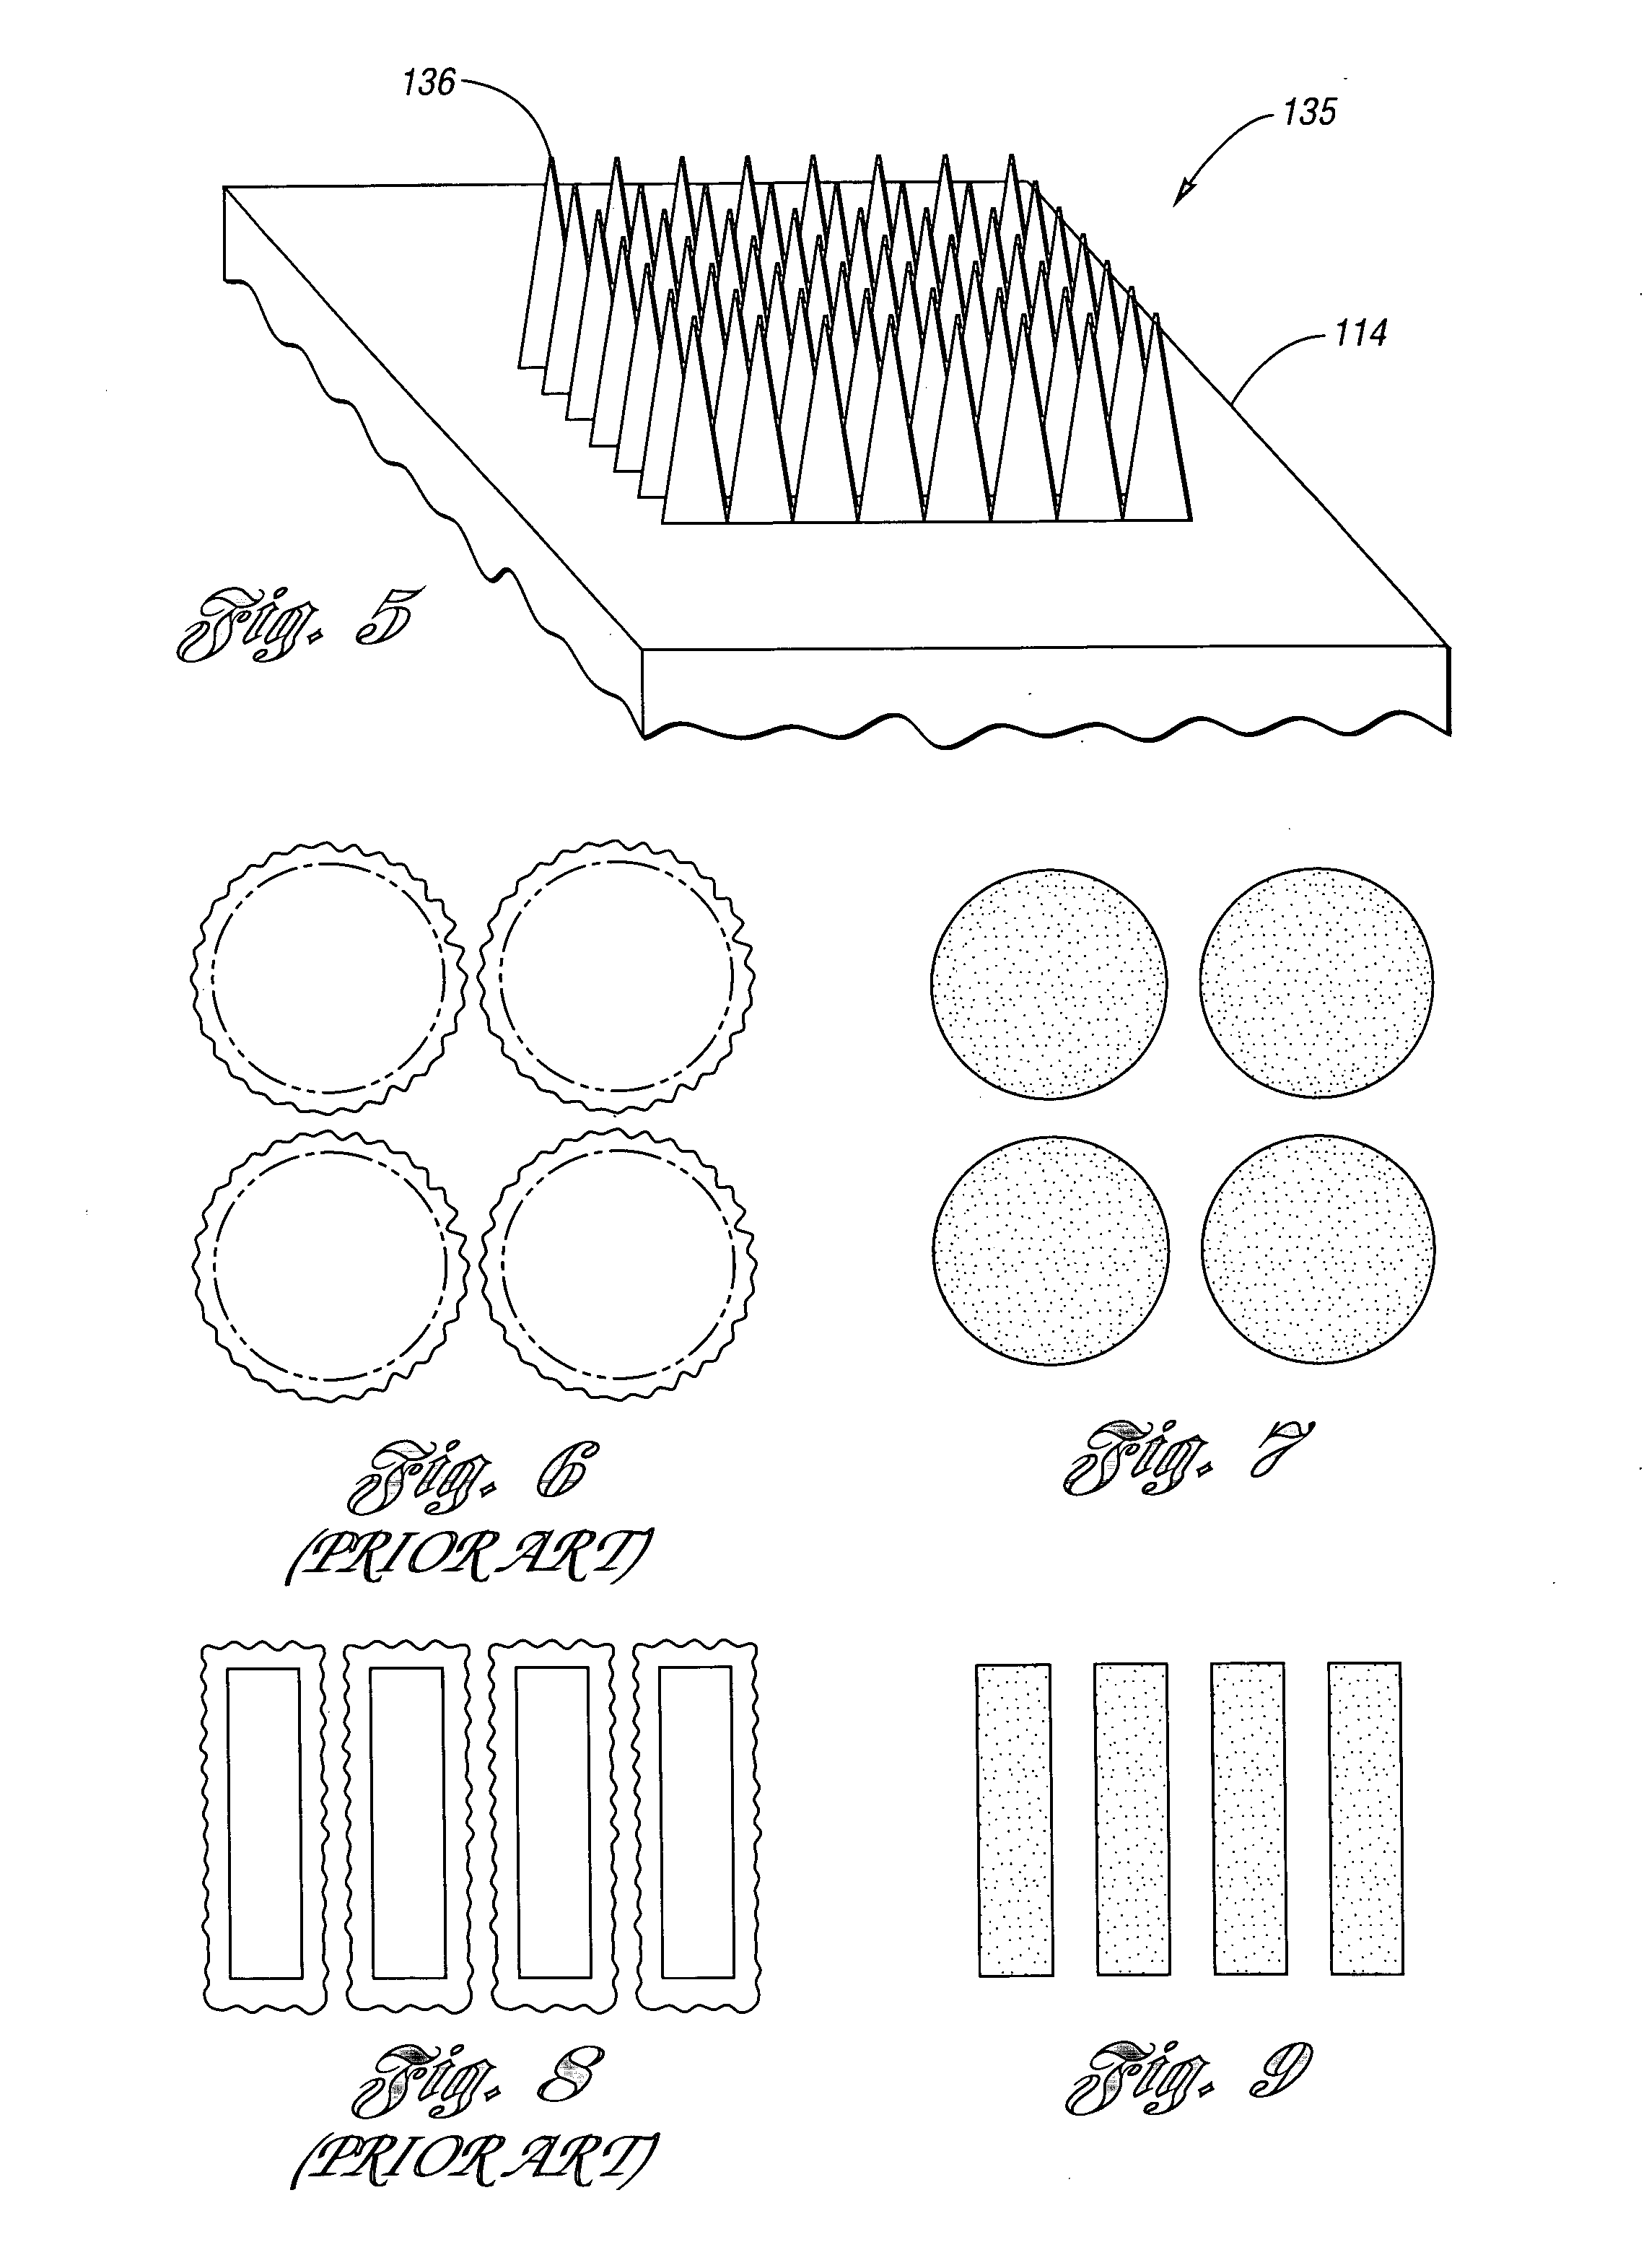 Laser-based method and system for processing targeted surface material and article produced thereby